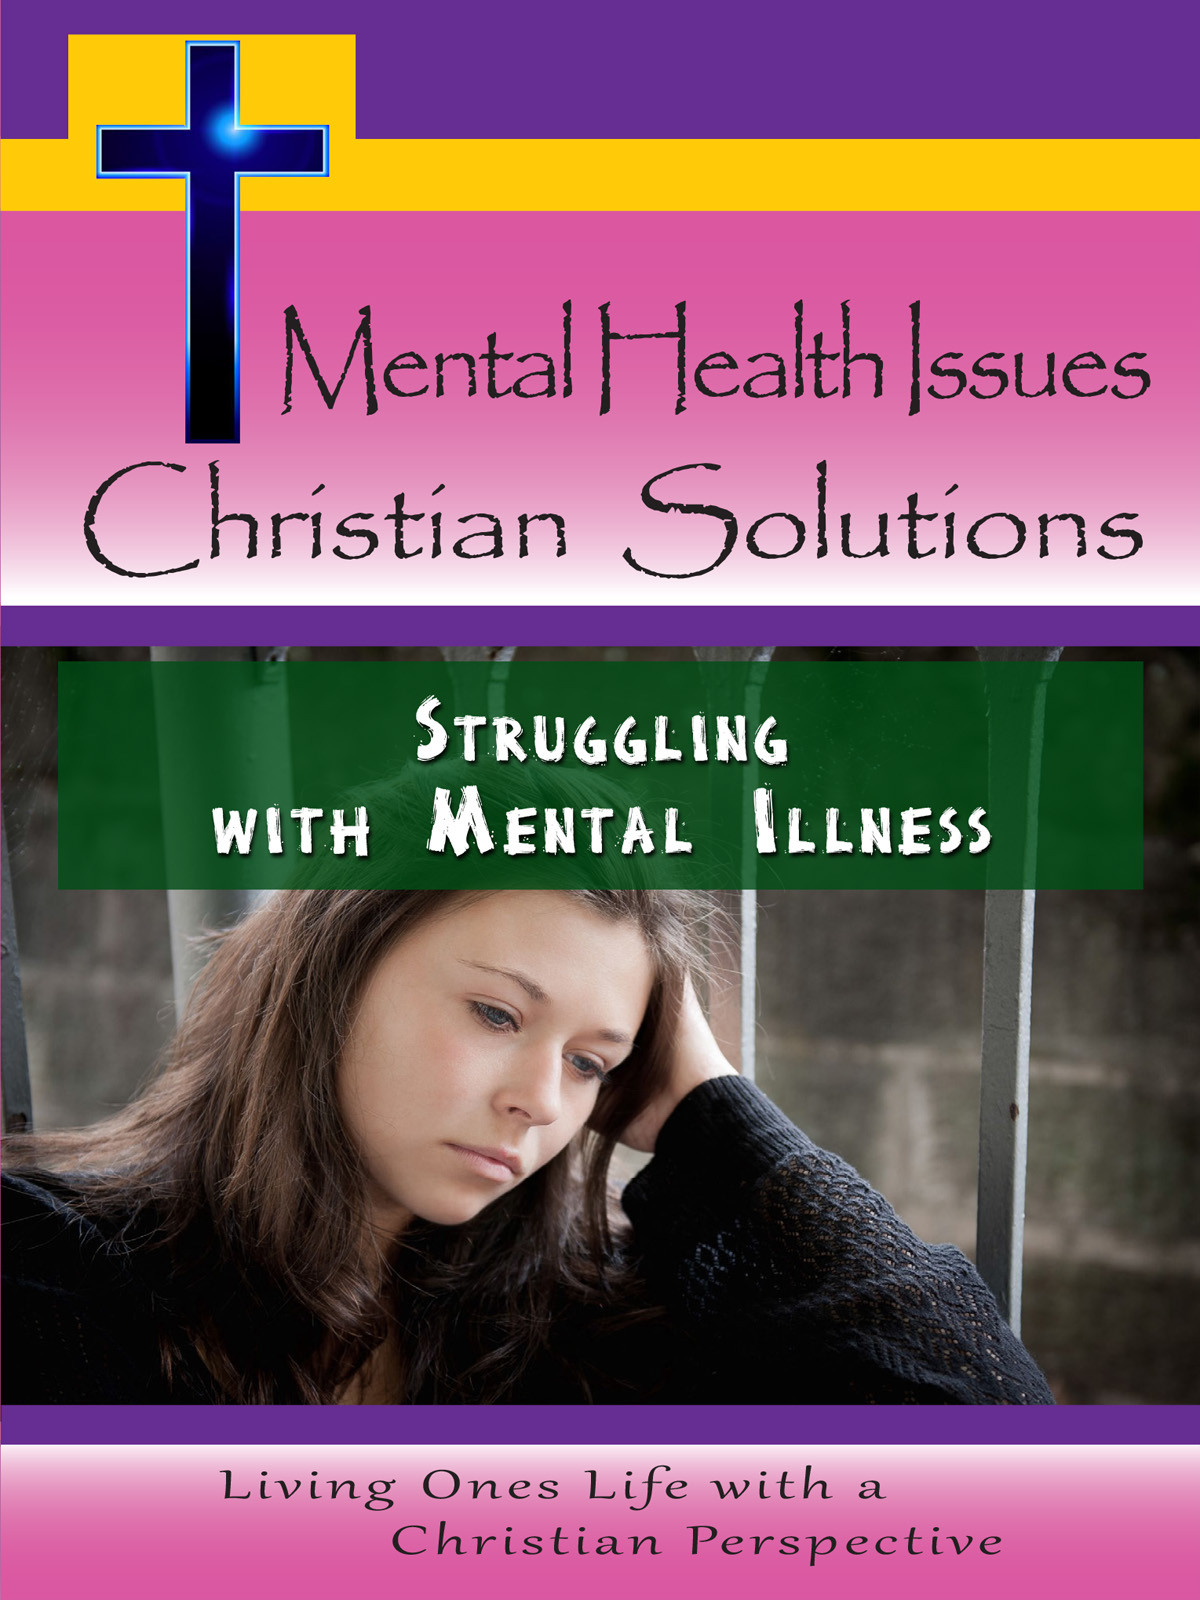 CH10008 - Struggling with Mental Illness